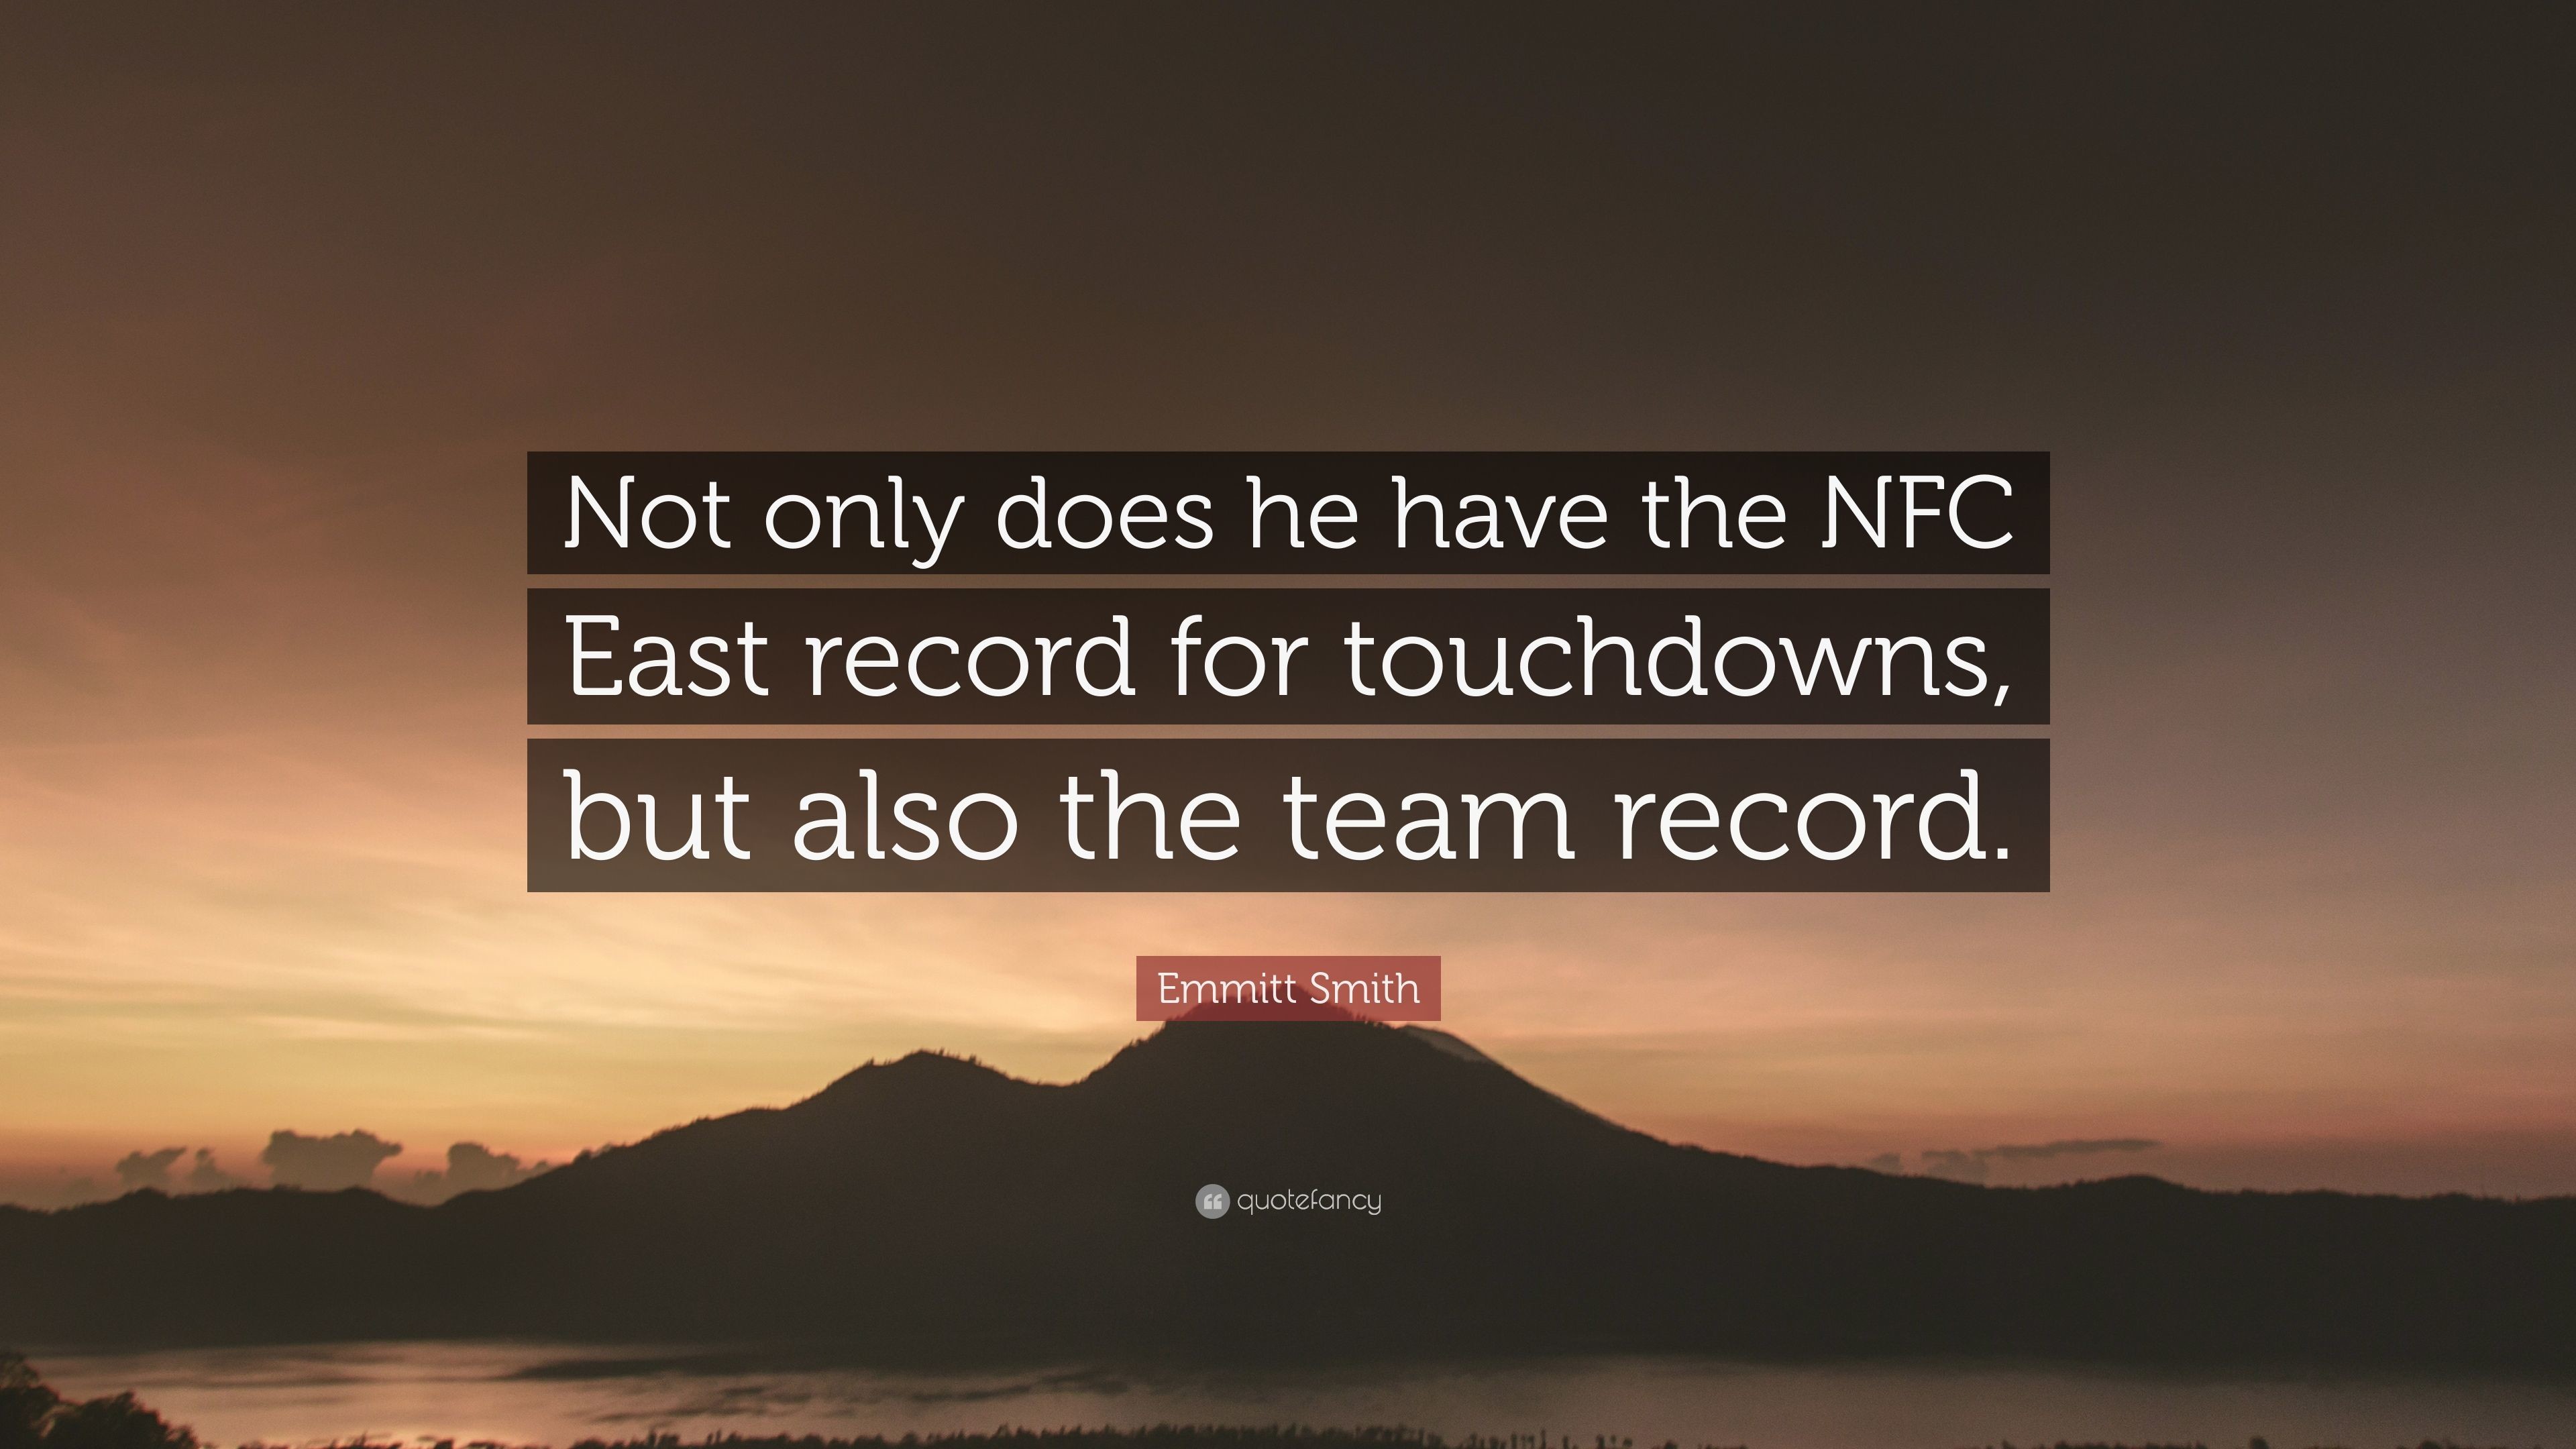 3840x2160 Emmitt Smith Quote: “Not only does he have the NFC East record for  touchdowns